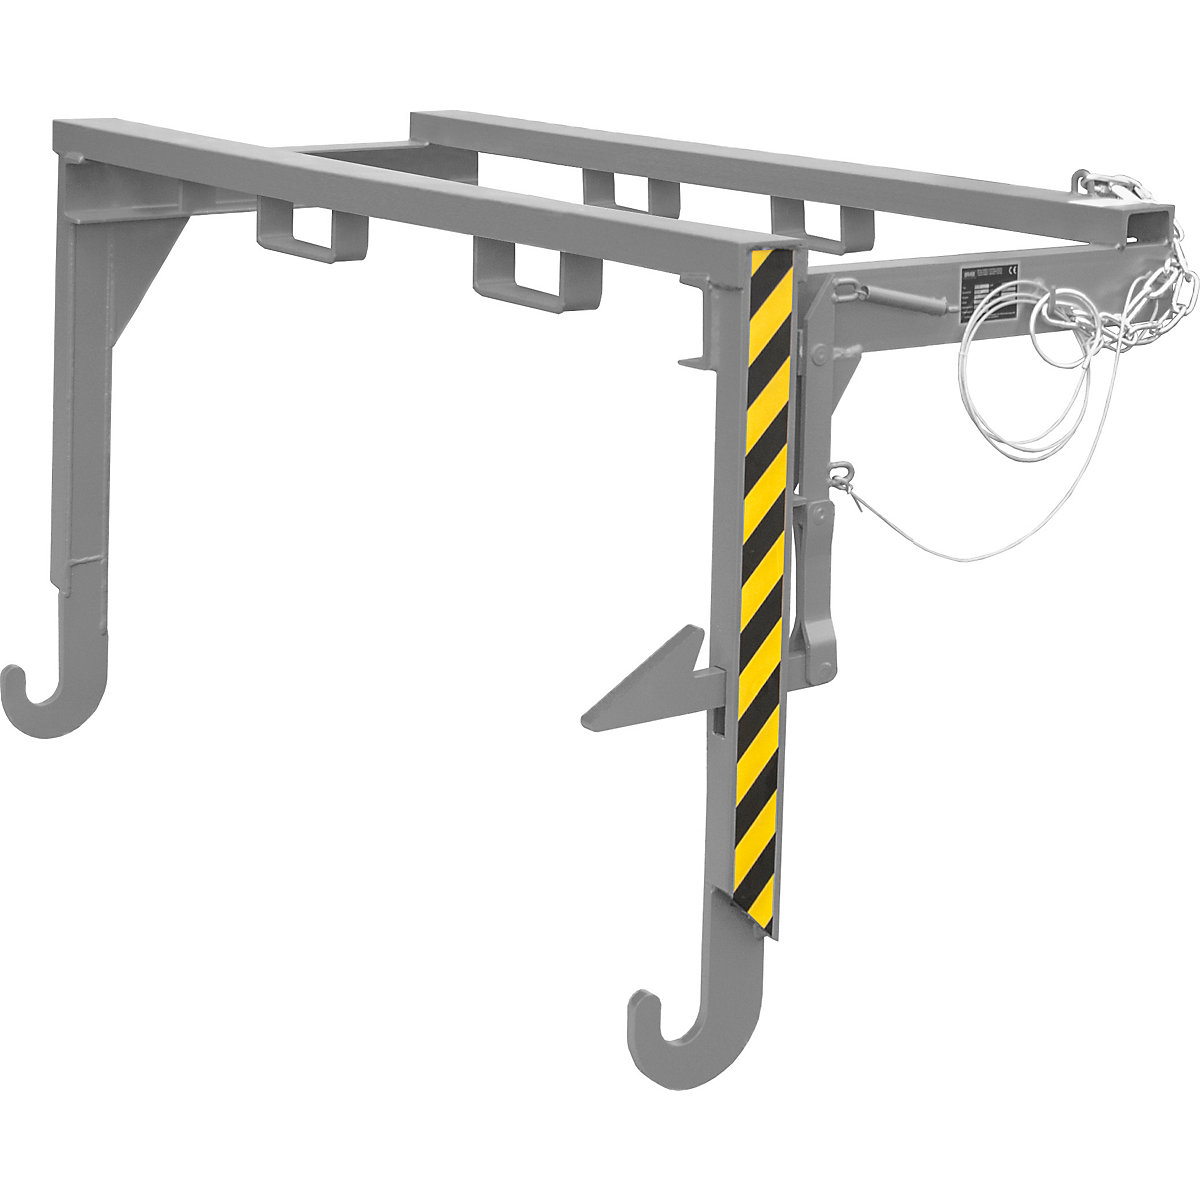 Forklift support bar for tilting skips and stacking containers – eurokraft pro, not for cranes, max. load 2000 kg, for container size 1.5 m³